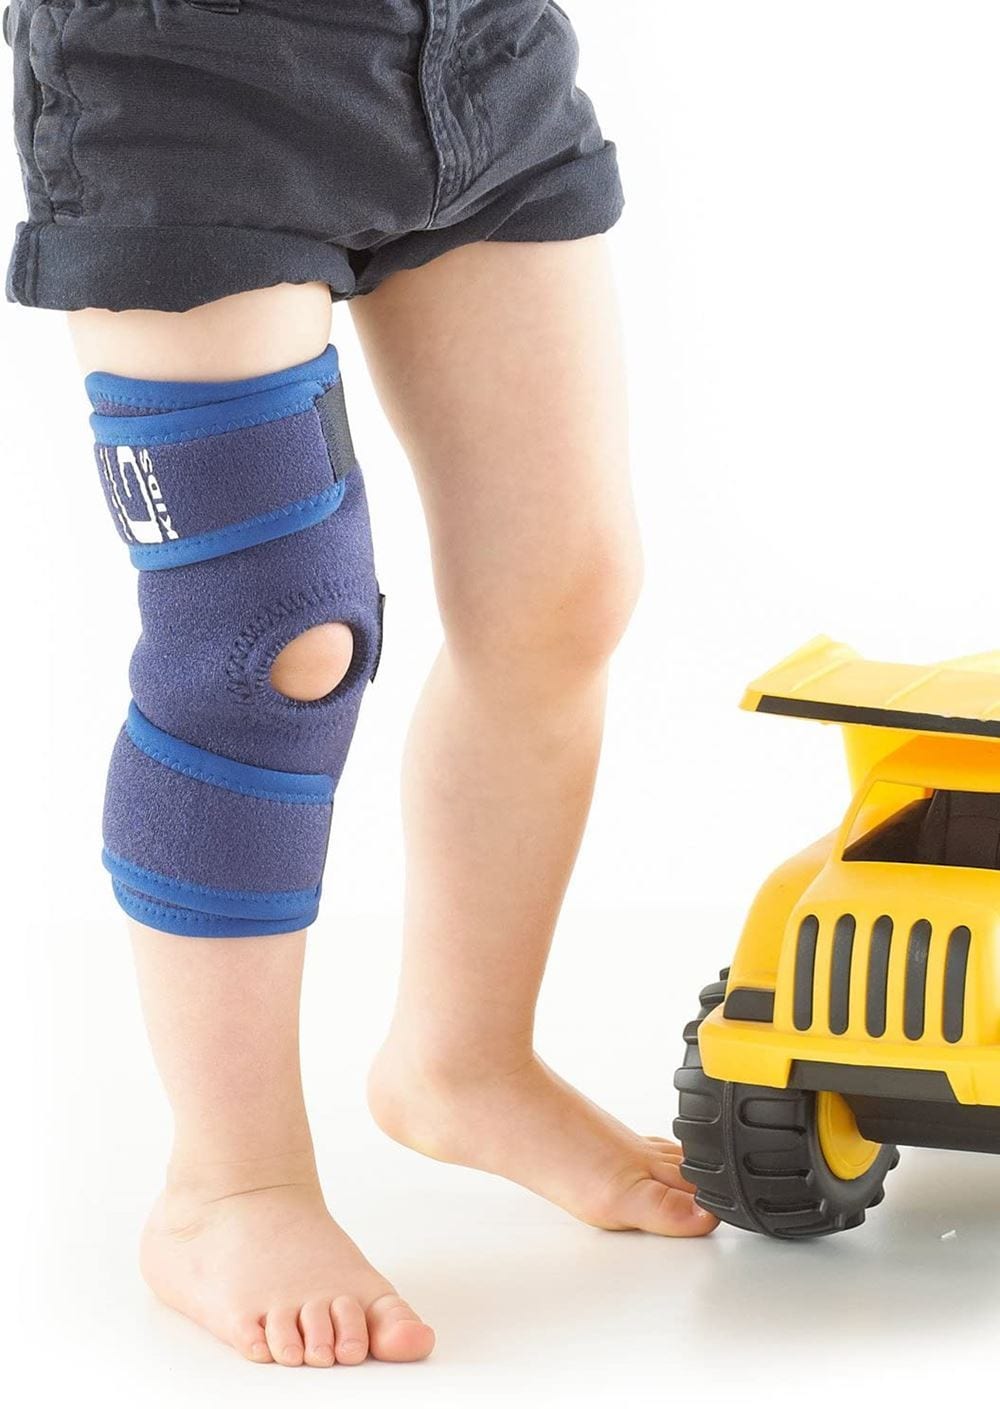 childrens toddlers knee support